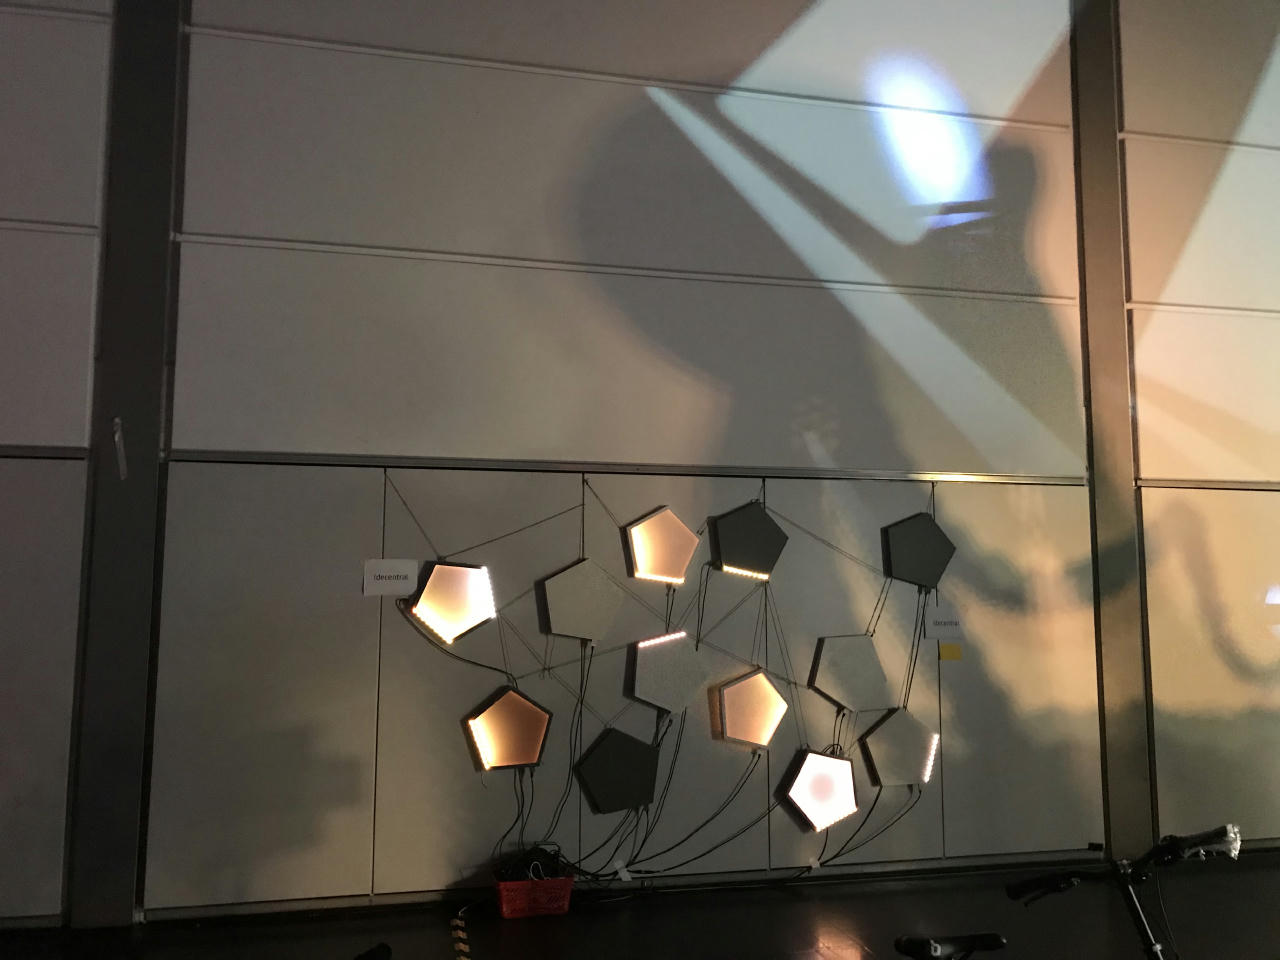 Some art-like connected electronics on a shaded wall.